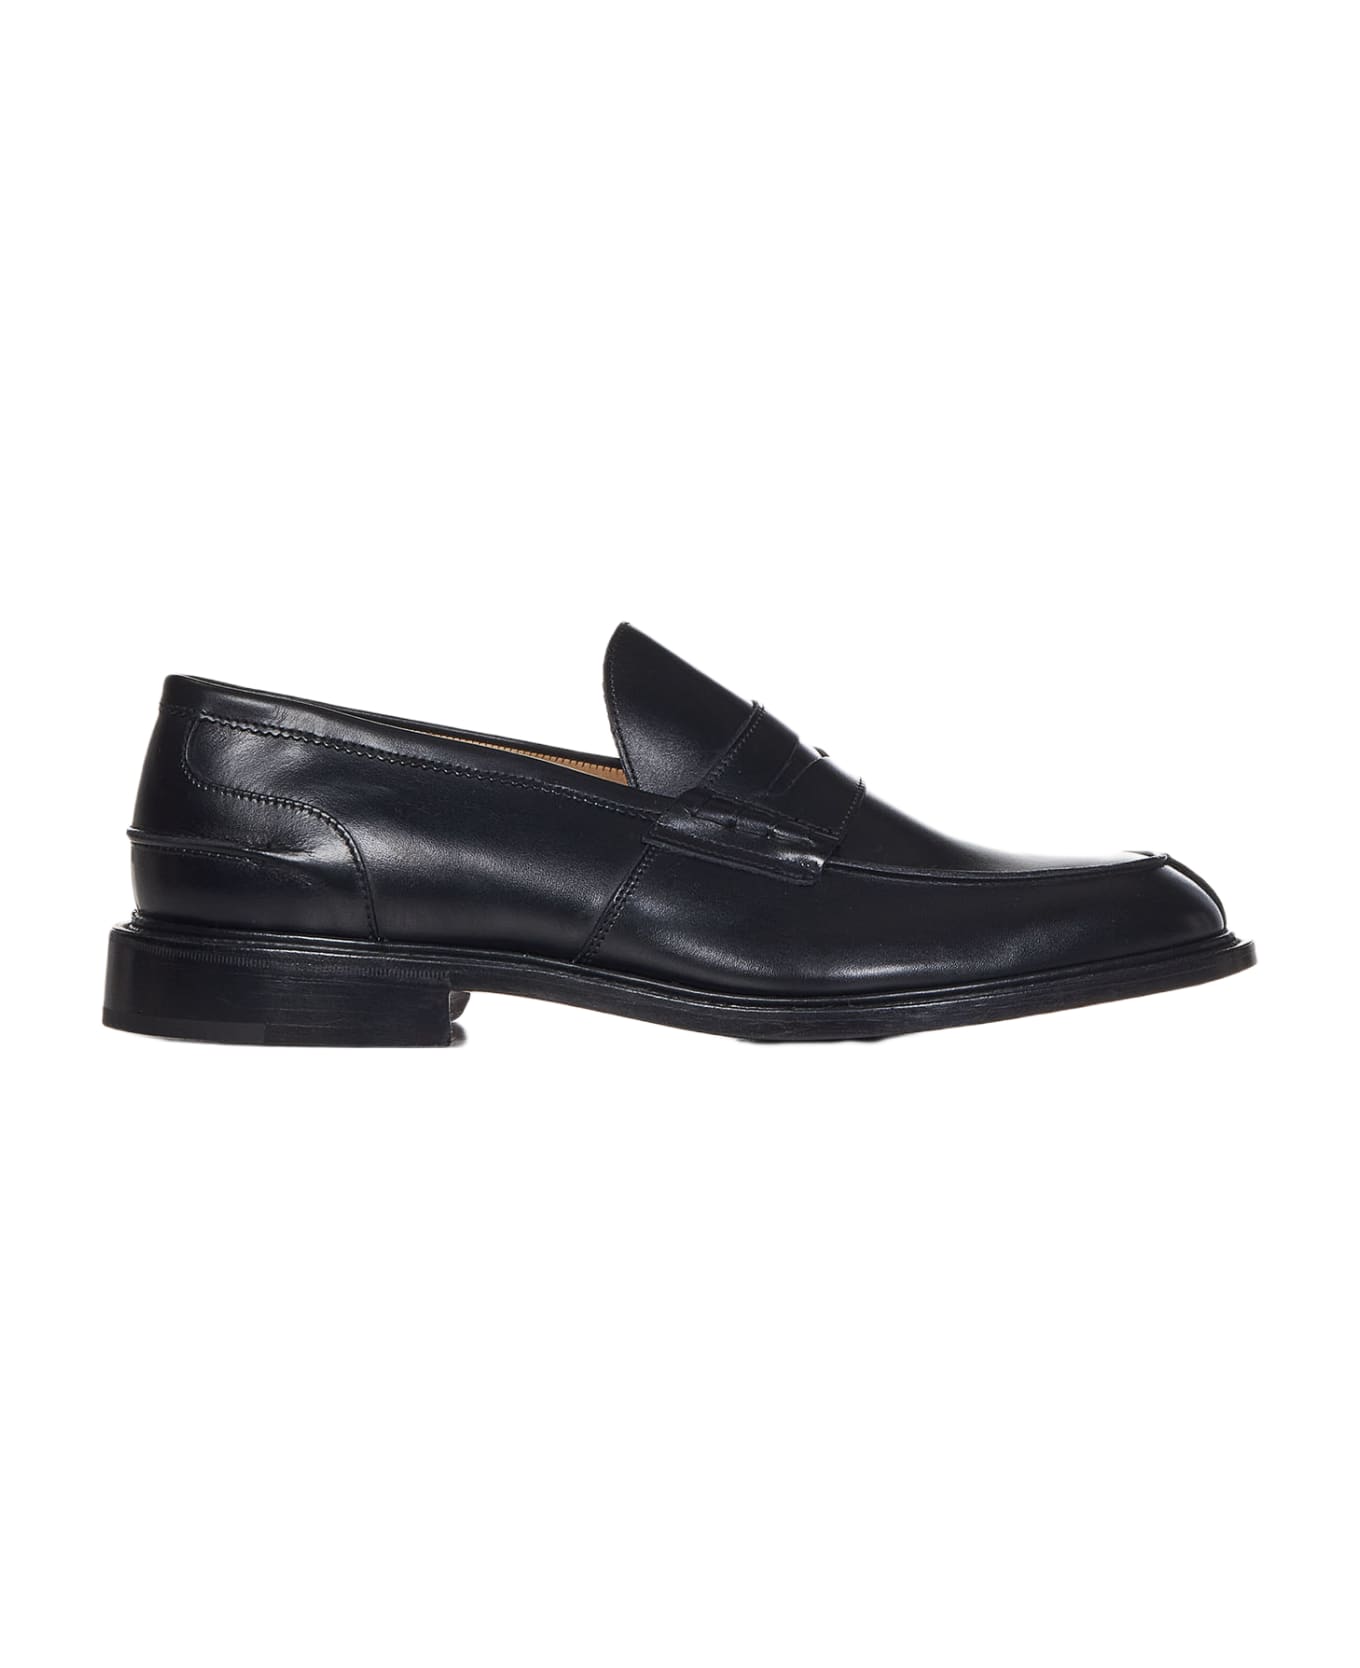 Tricker's James Loafers - Black Calf